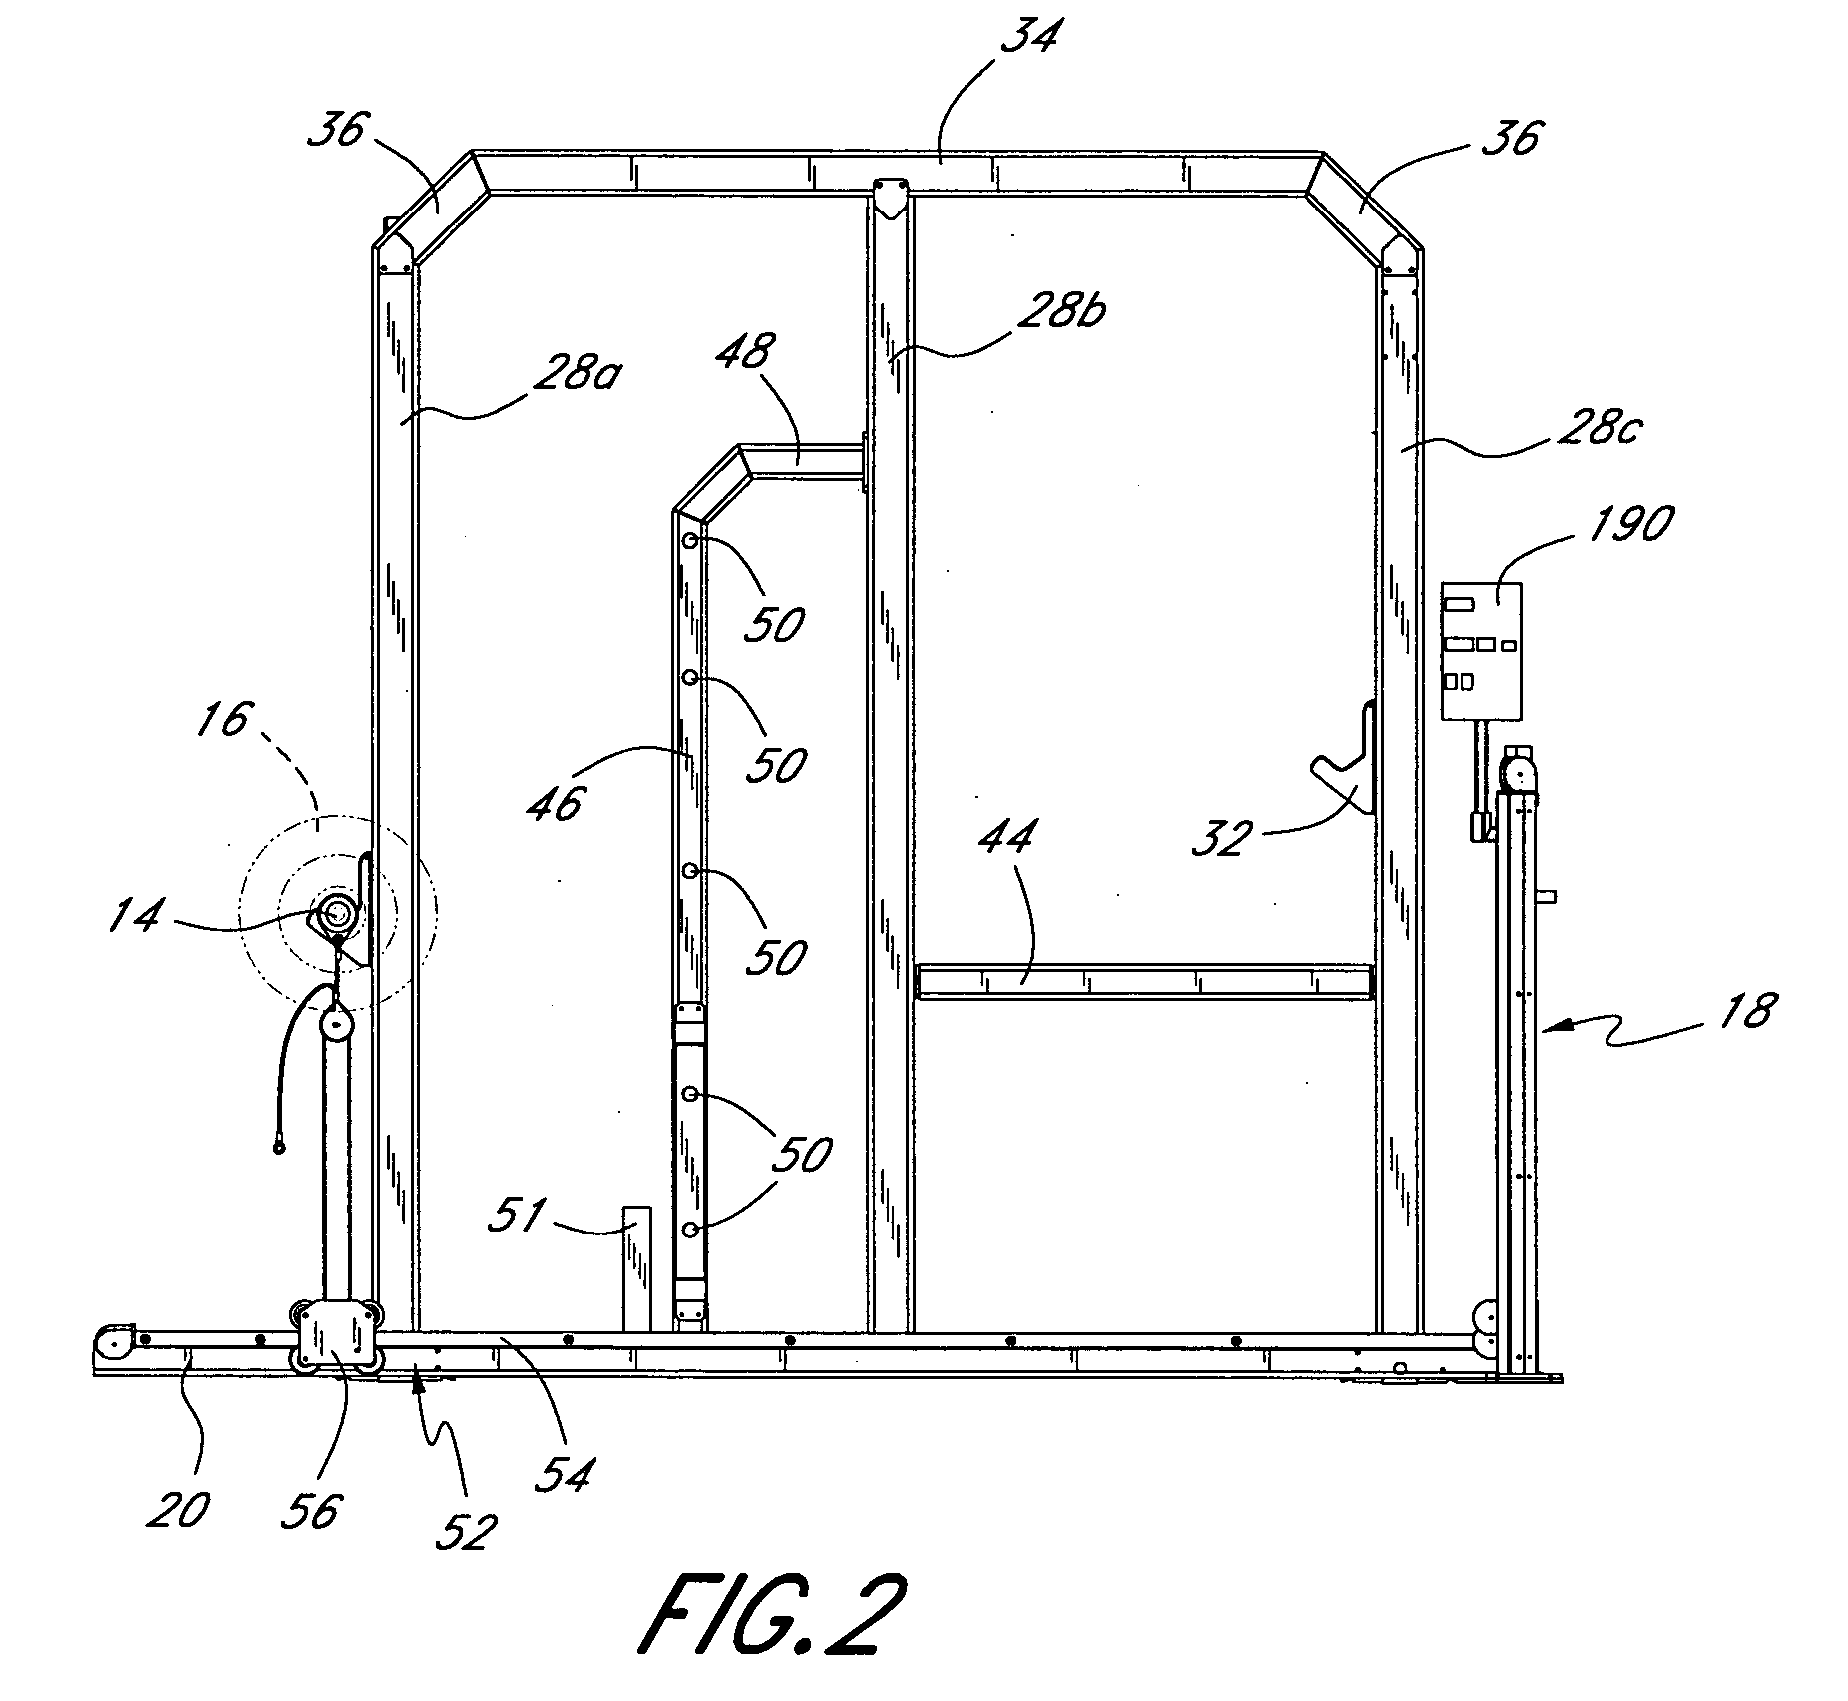 Exercise apparatus using weight and pneumatic resistances